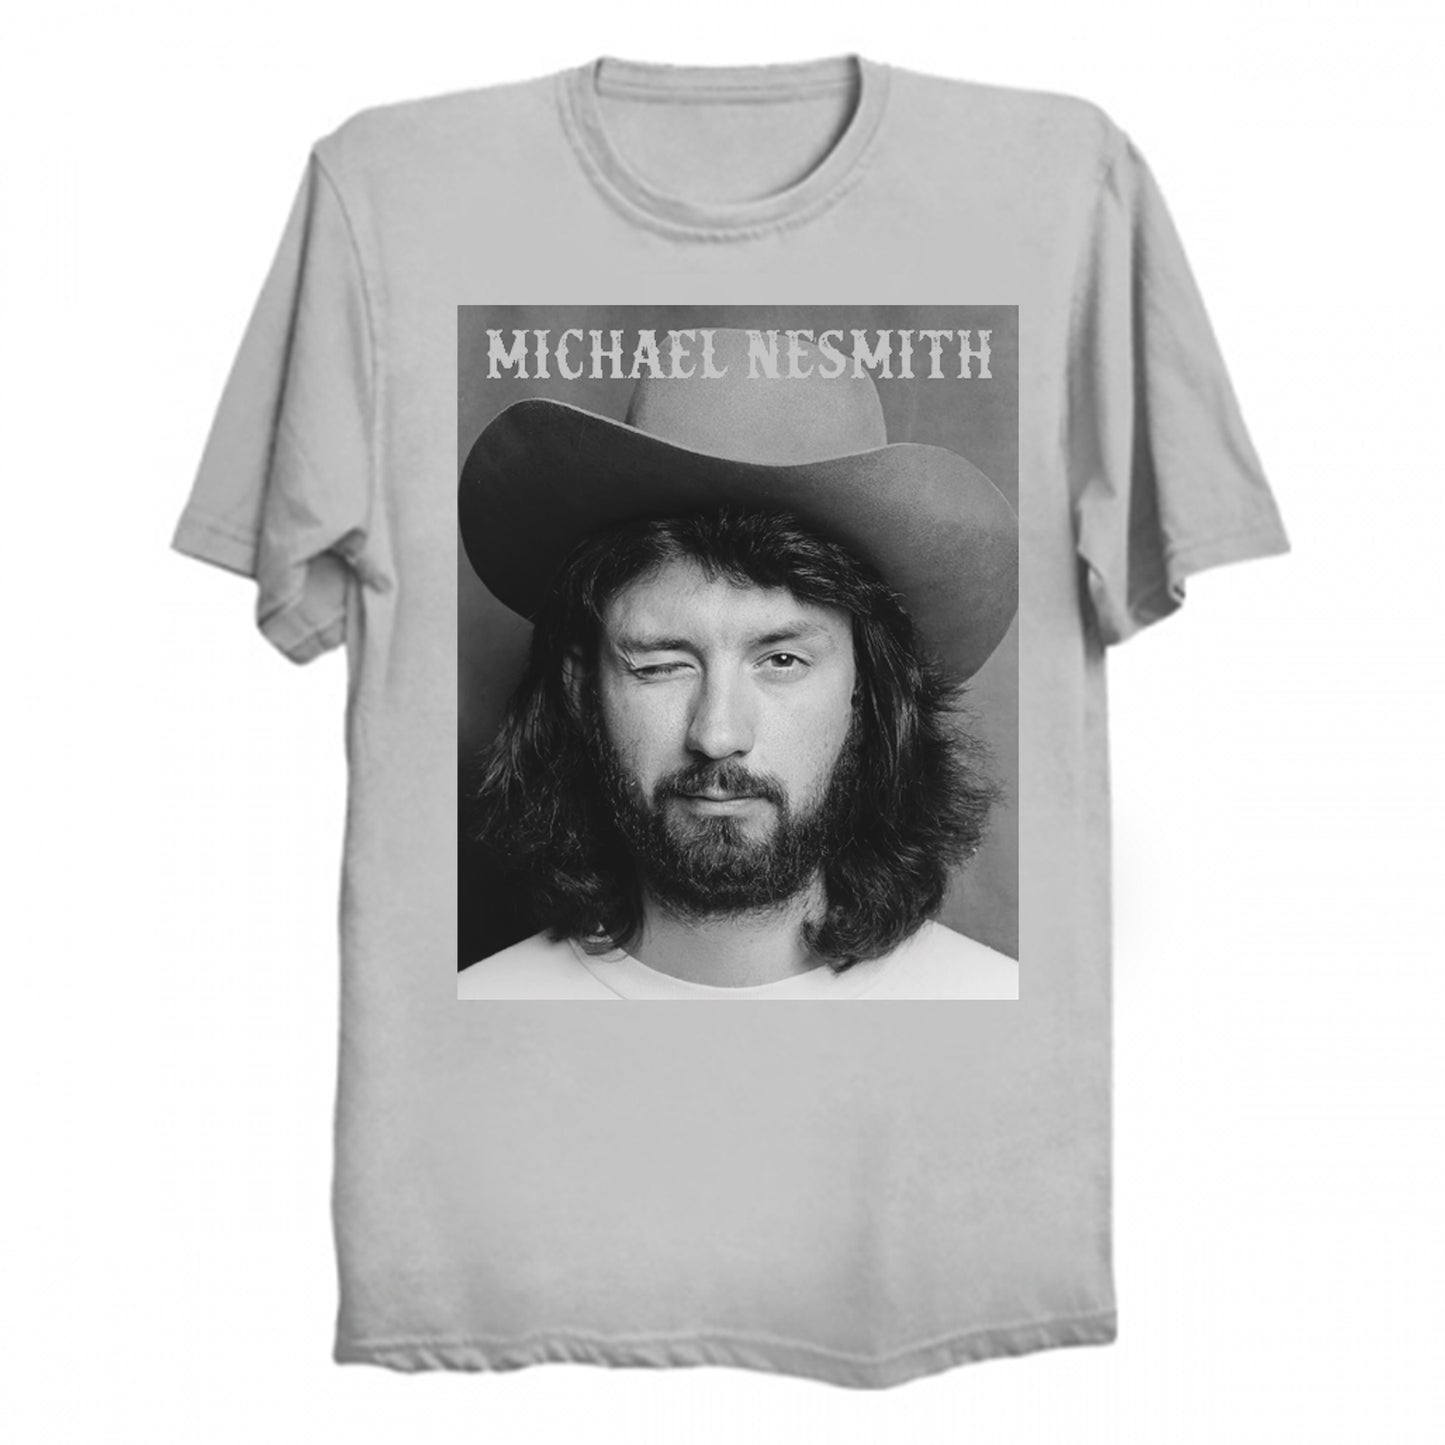 Mike Nesmith - King Monkee T-Shirt